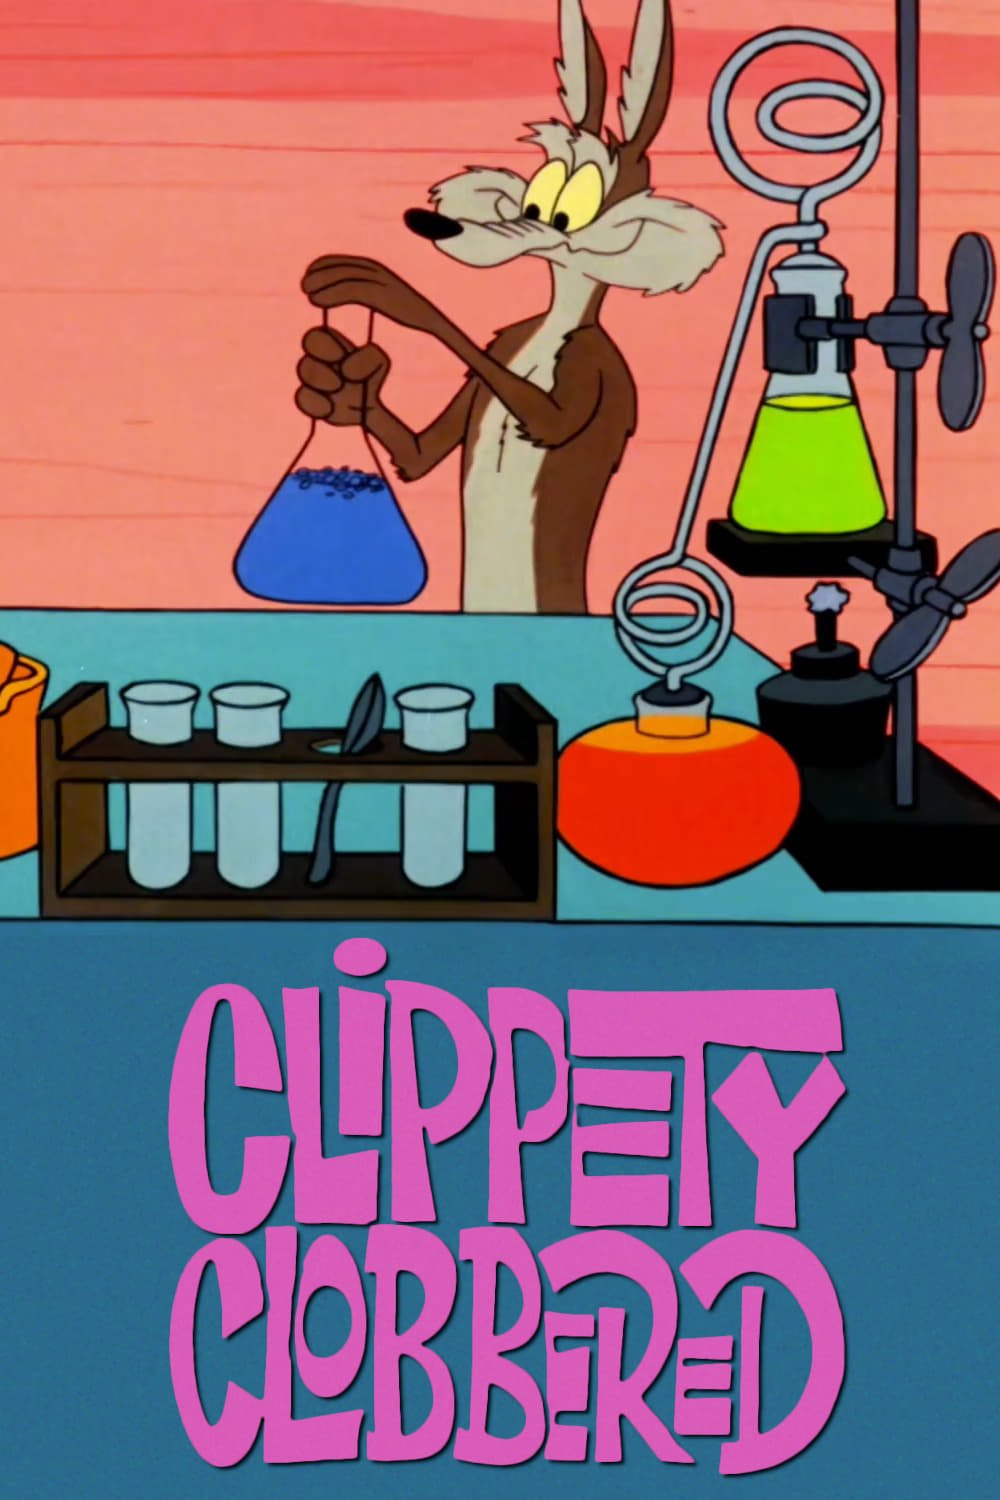 Clippety Clobbered